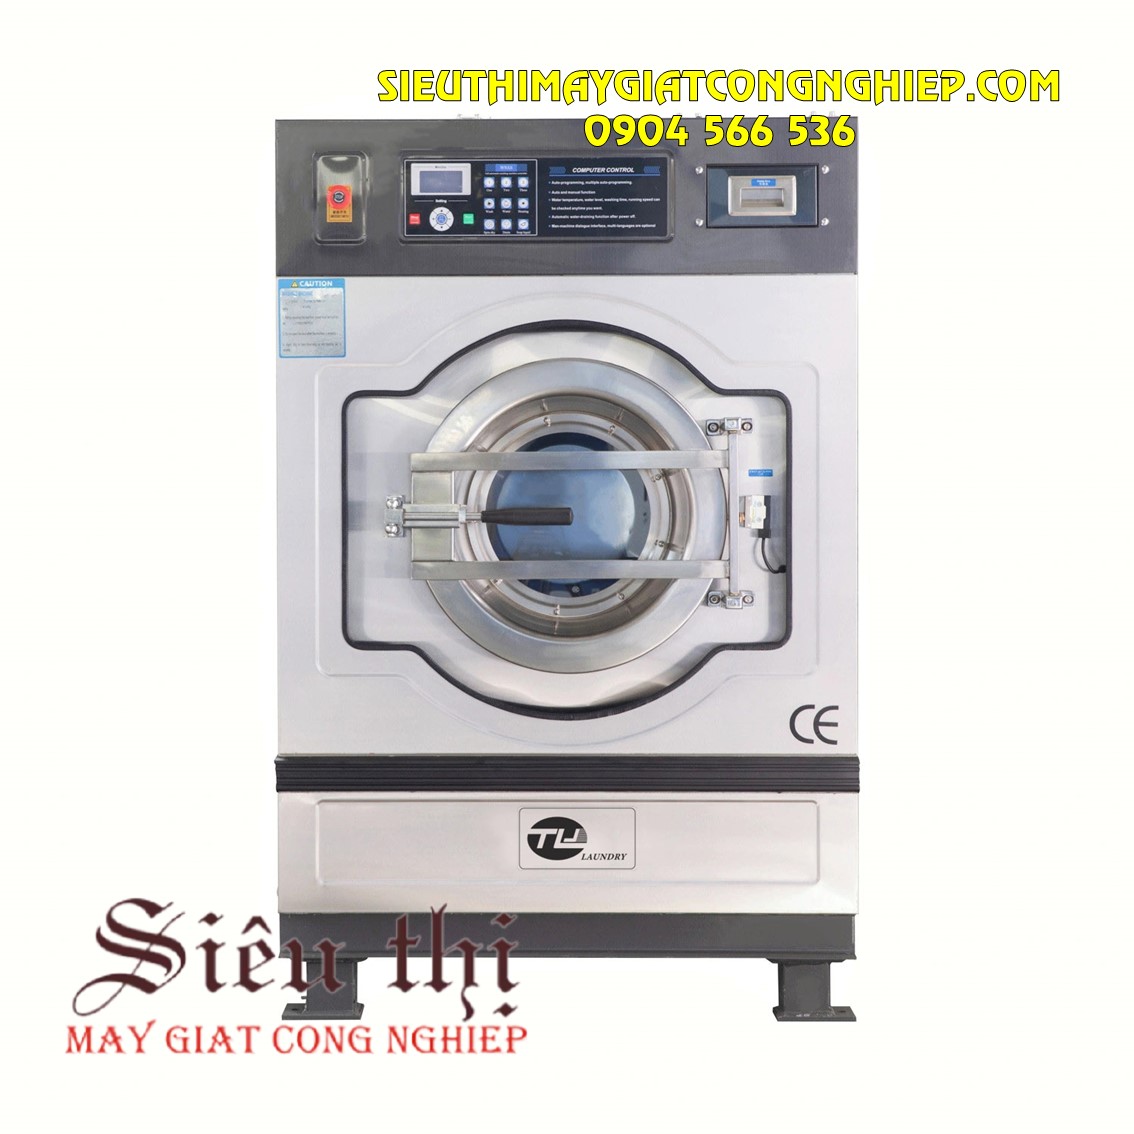 May-Giat-Cong-Nghiep-15kg-TLJ-Laundry-TLJ-FW15